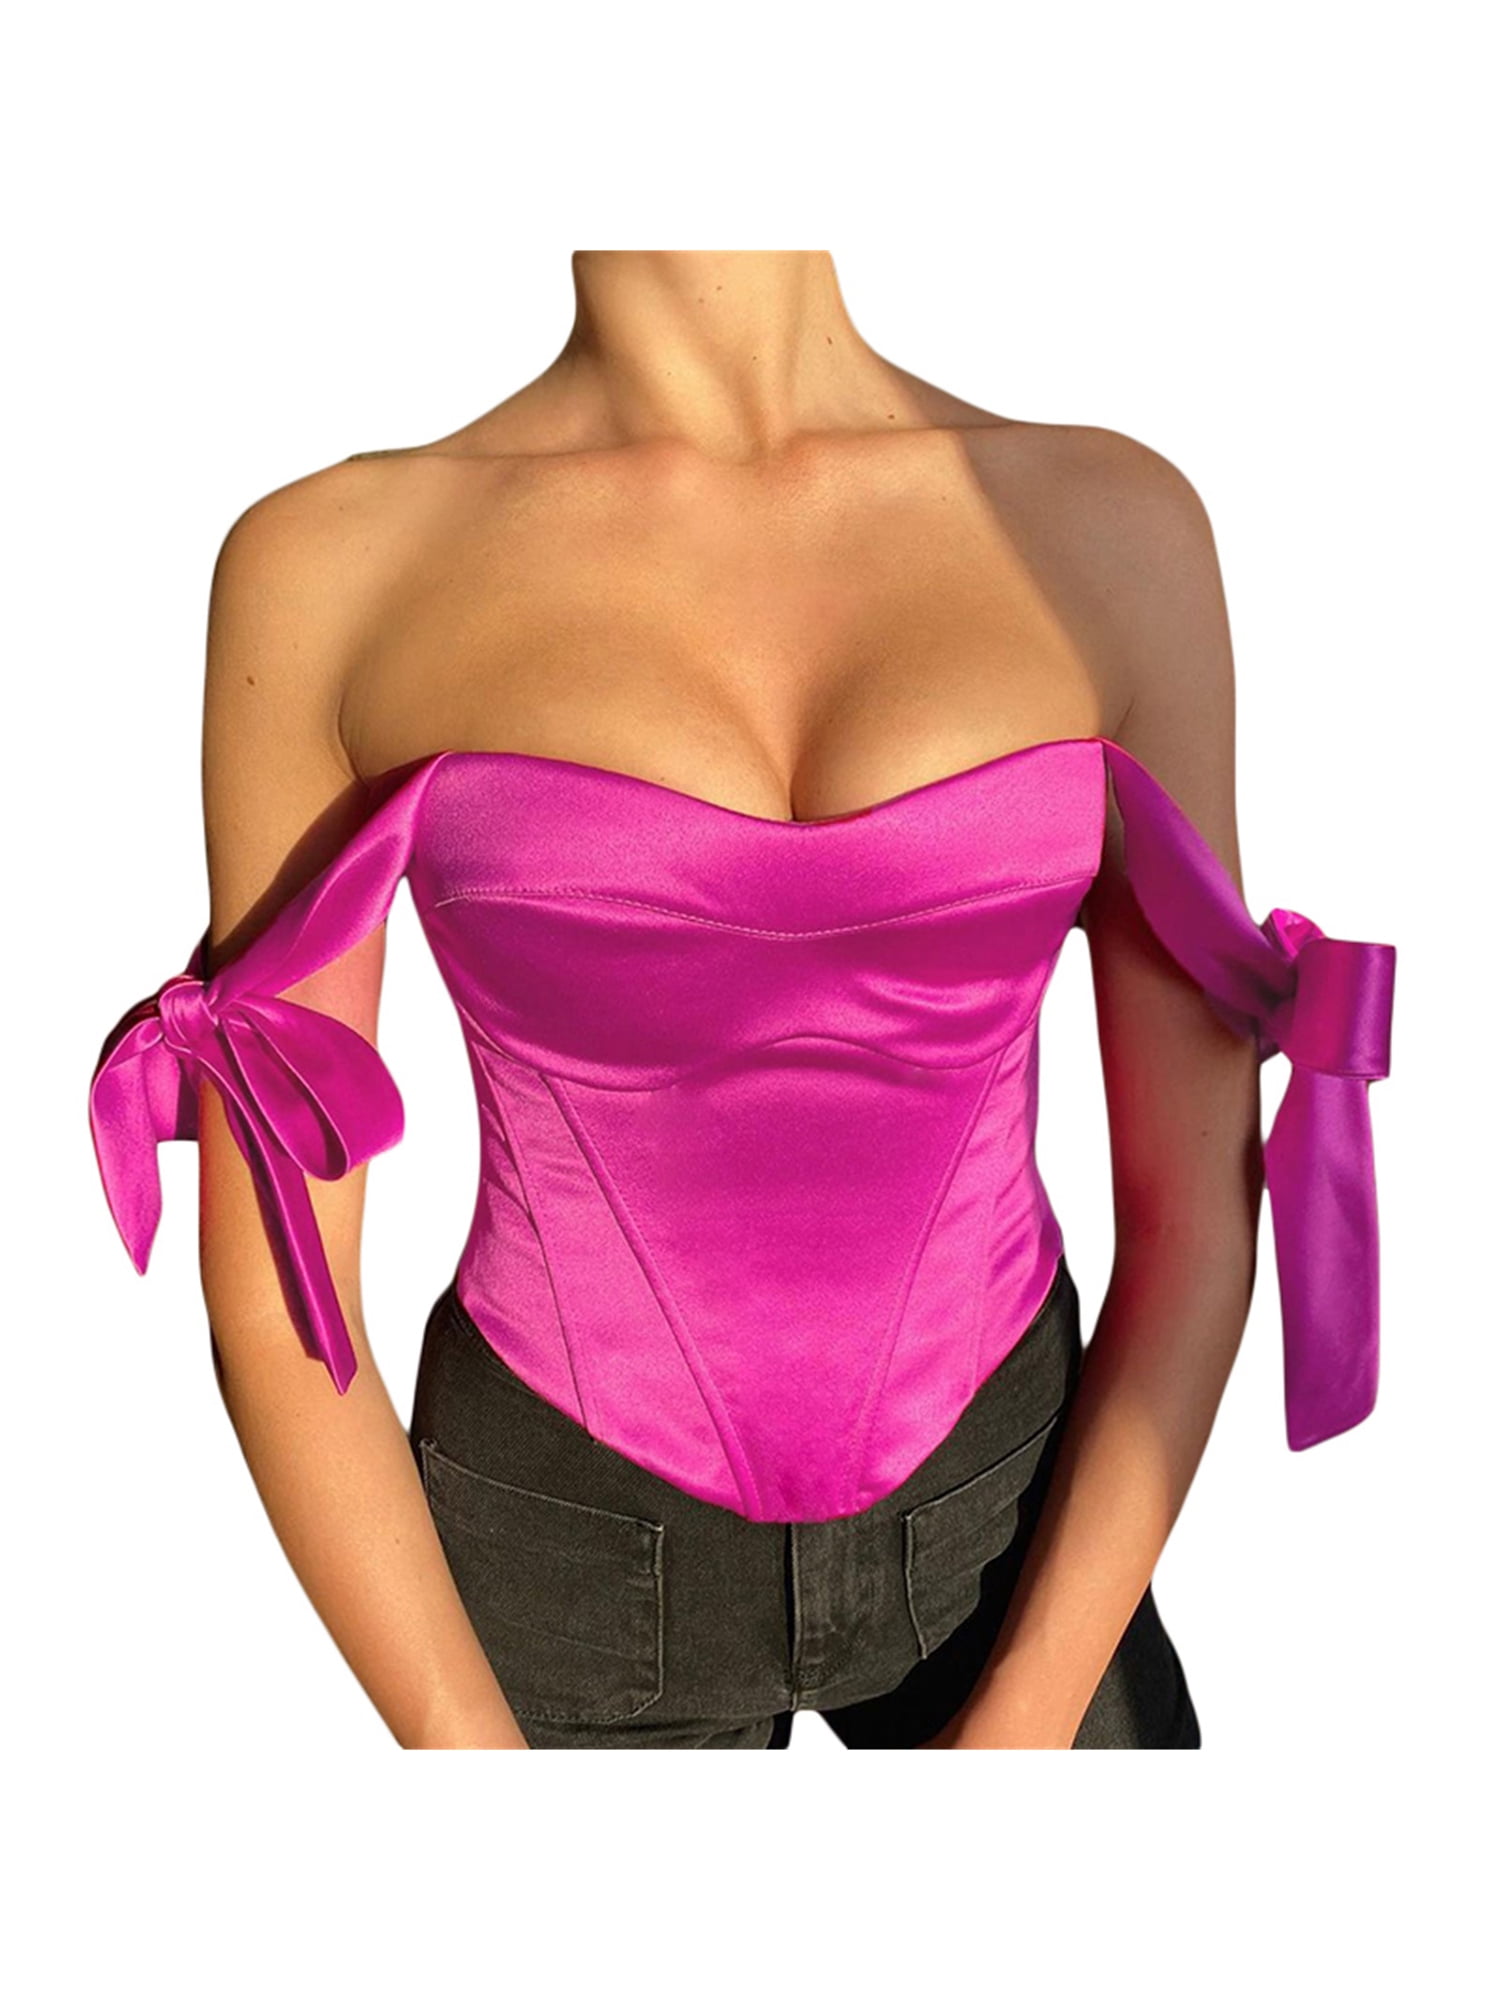 B91xZ Shirts For Women Womens Corset Top Bustier Corset Top Tight Fitting  Corset Tank Top Suspender Top Solid Short Hot Pink, S 